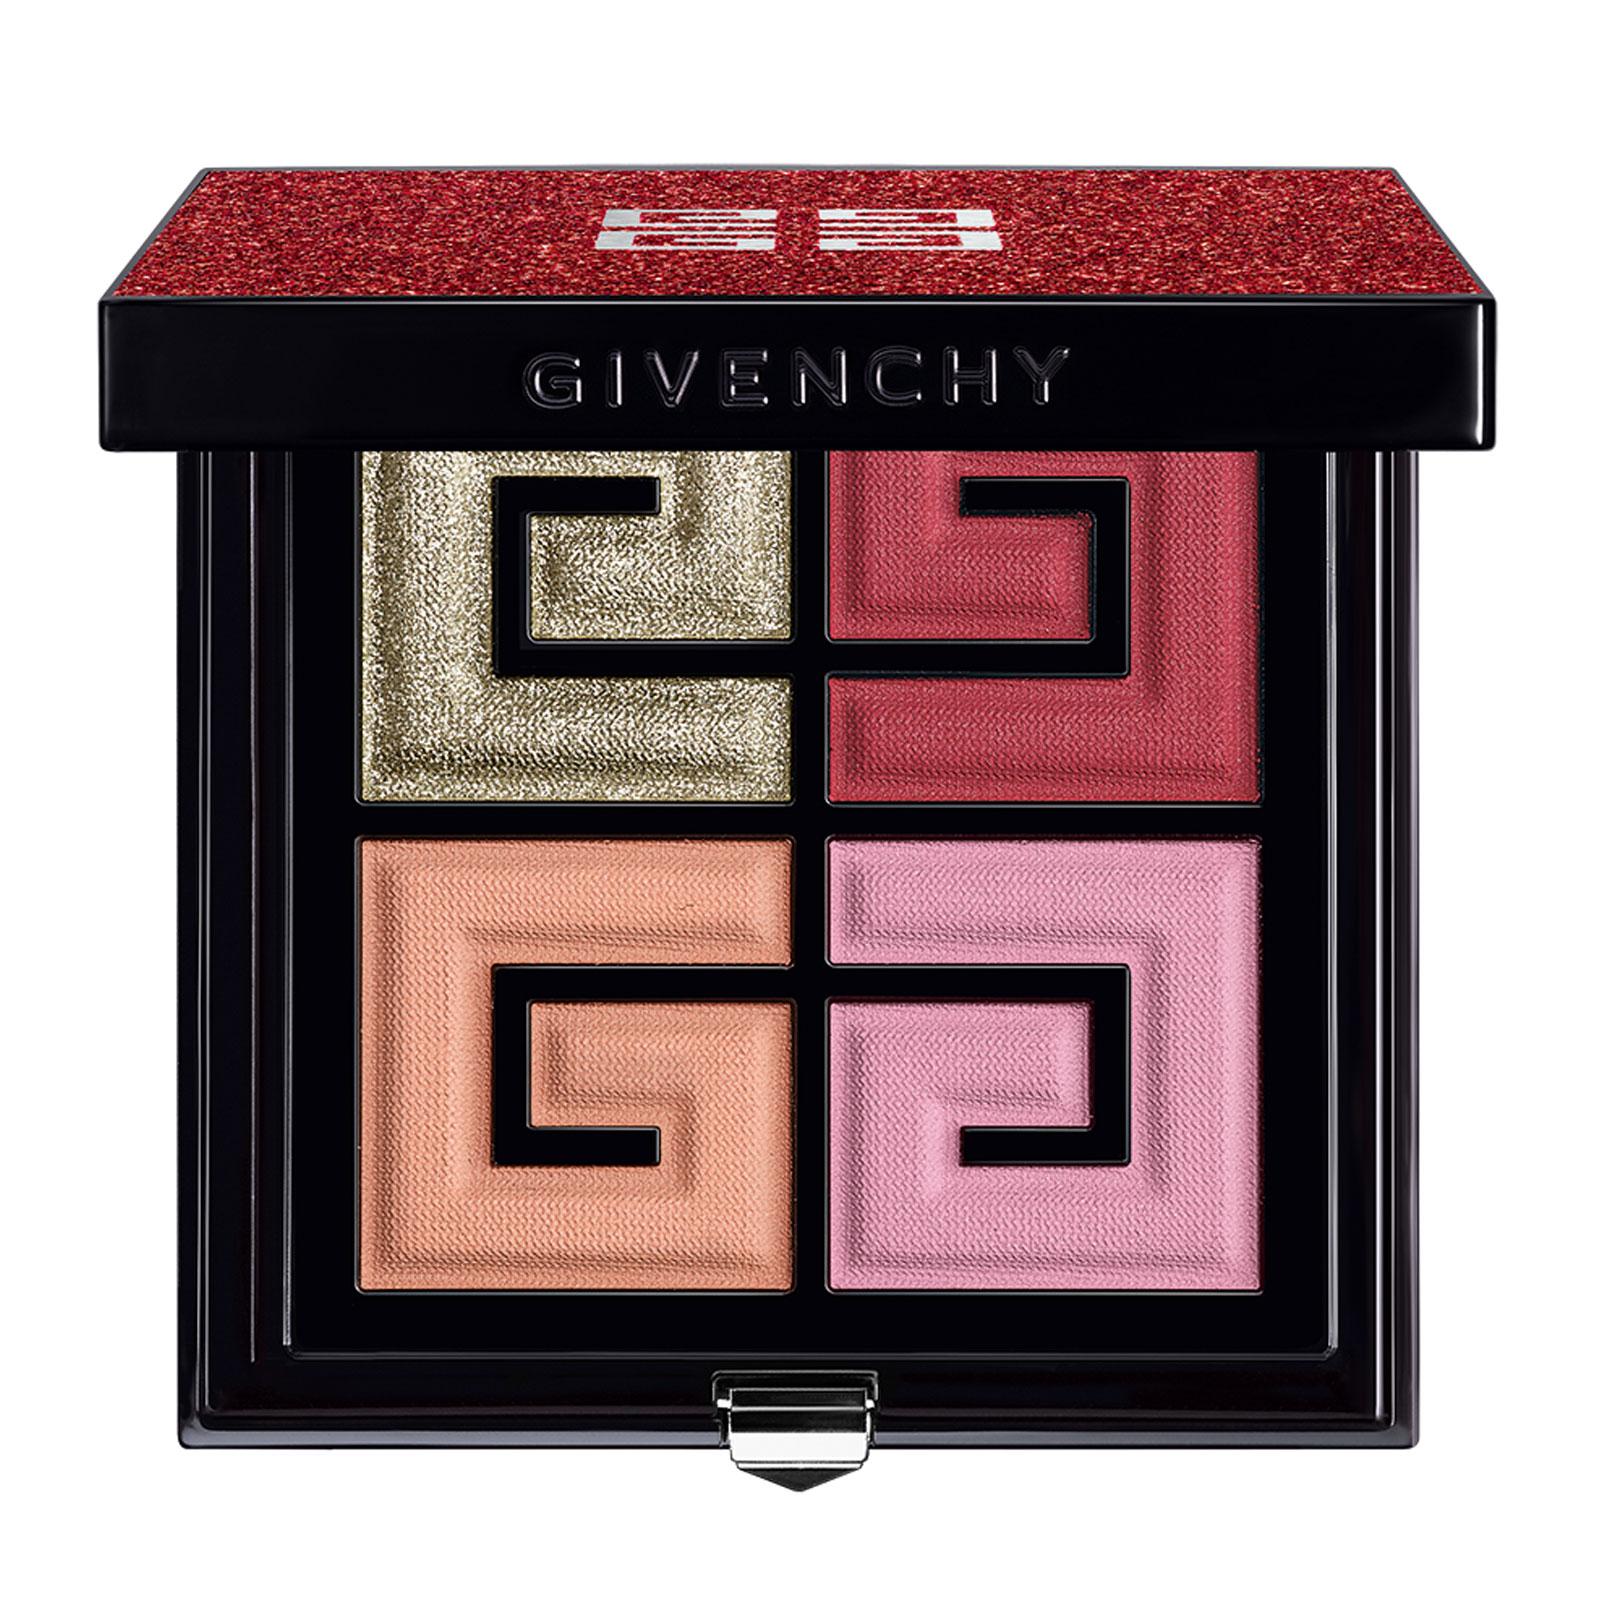 Givenchy_red_lights_palette